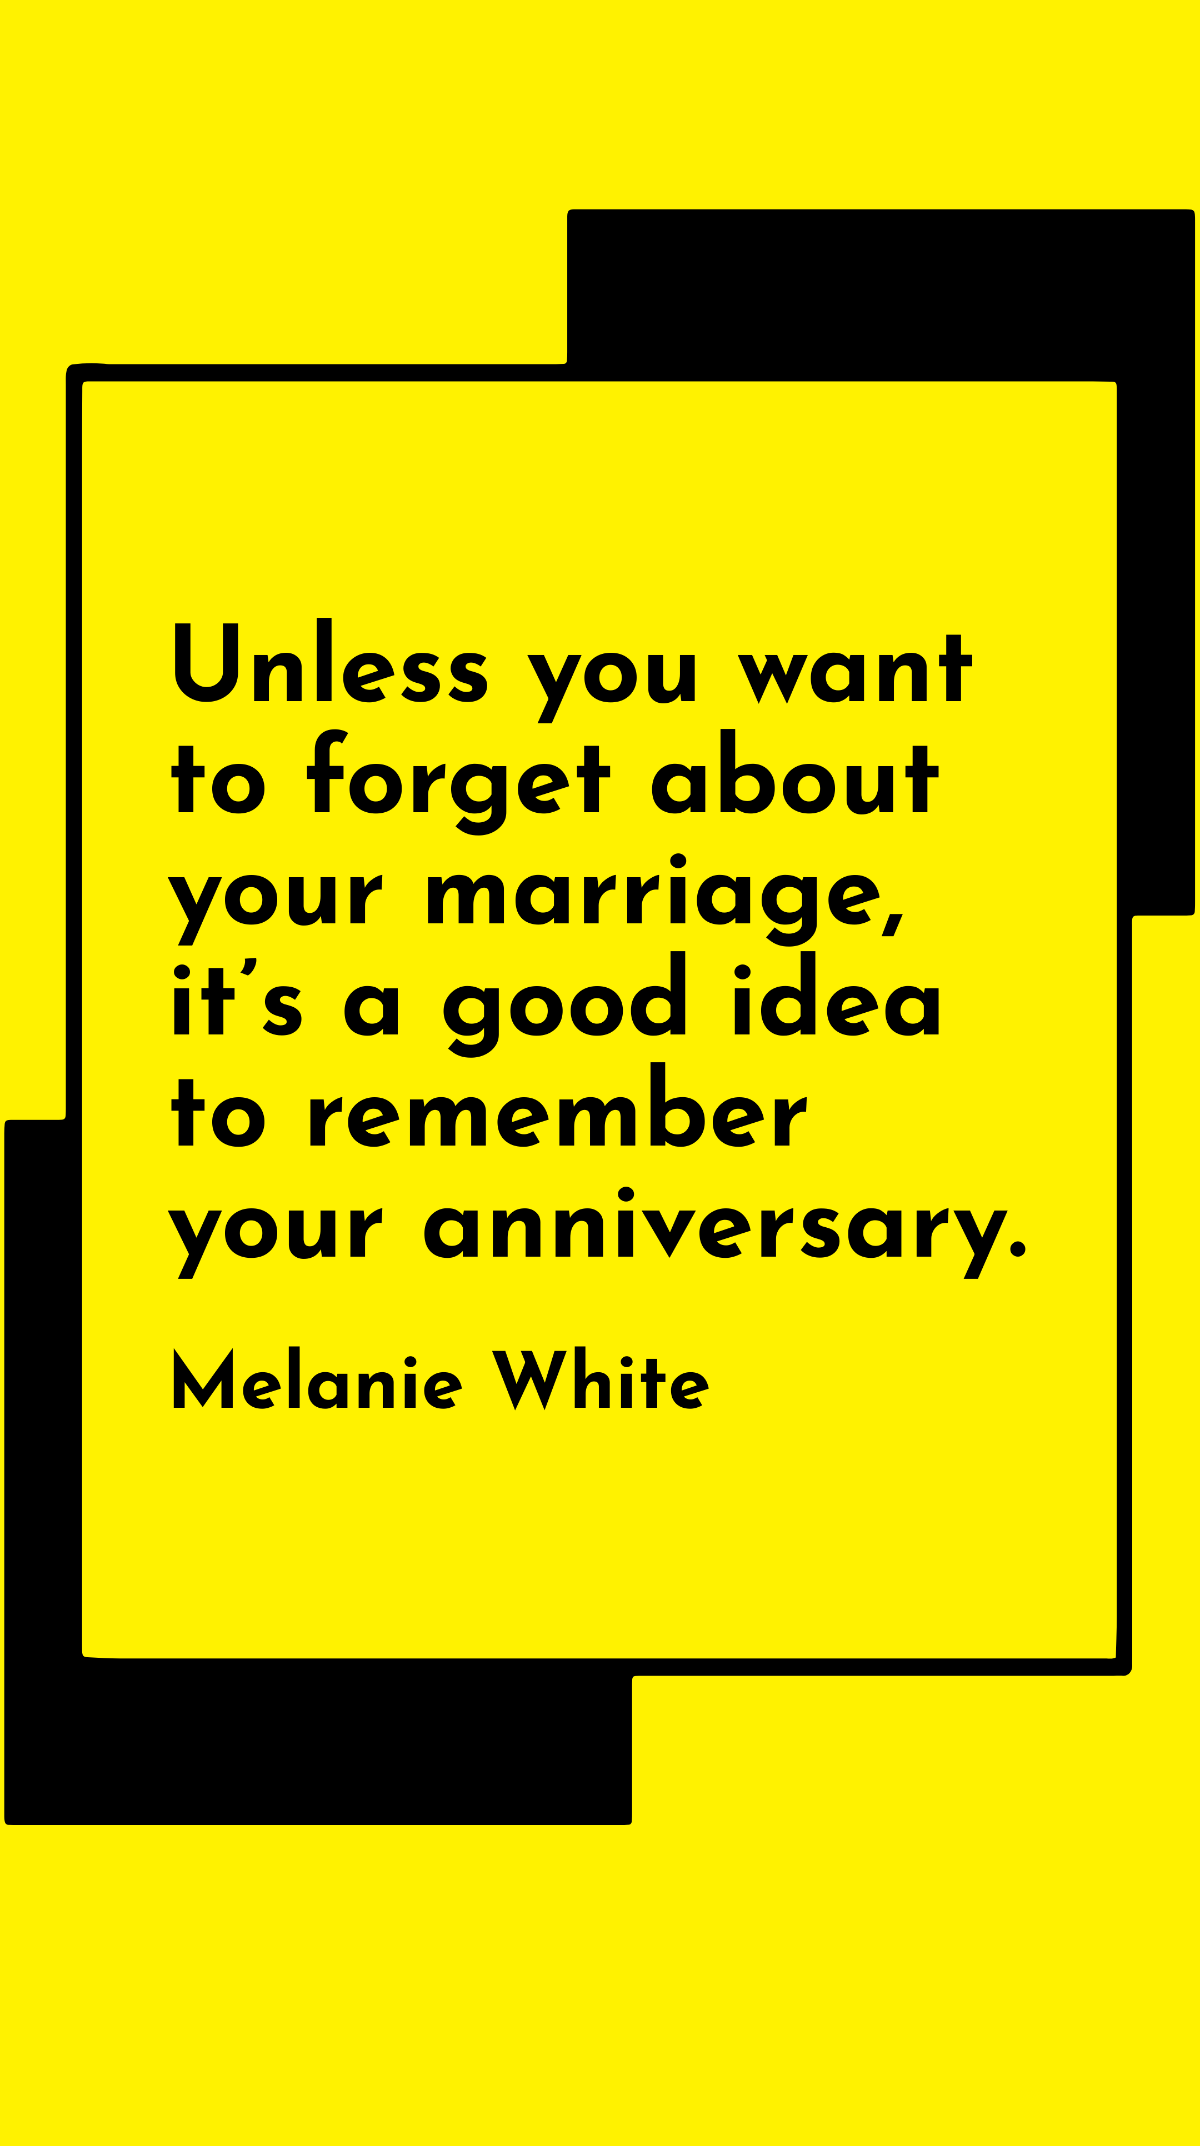 Free Melanie White - Unless you want to forget about your marriage, it’s a good idea to remember your anniversary. Template